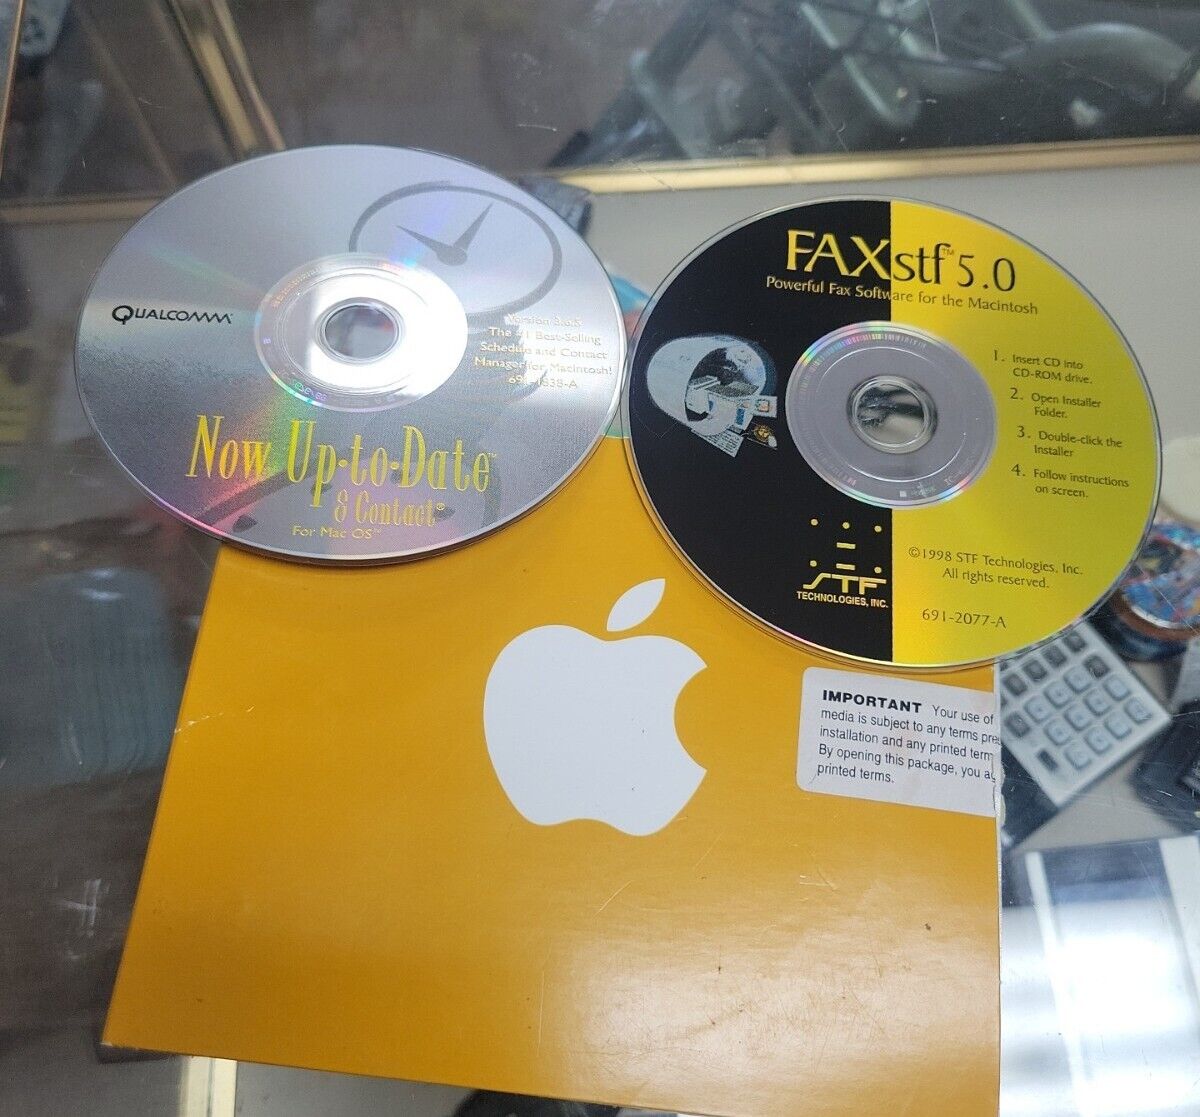 2 Vintage Apple MacBook CDs Now Up To Date 3.6.5 / Faxstf 5.0/ & Apple CD Holder